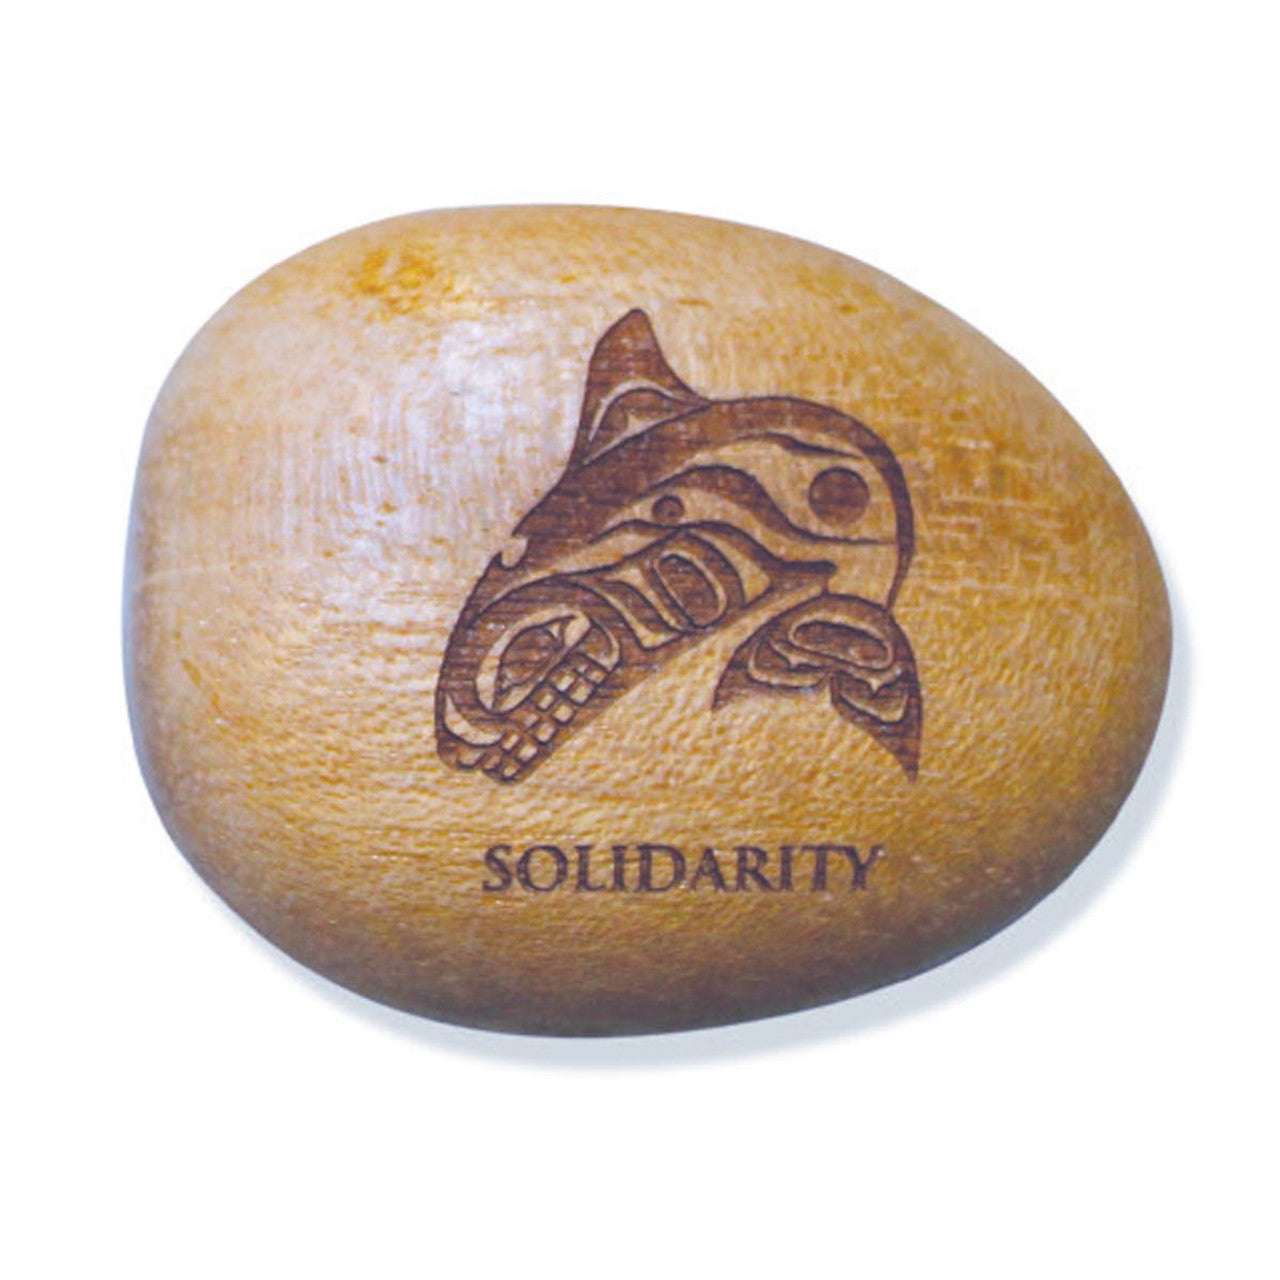 Totem Spirits Wood - Whale “Solidarity” by Paul Windsor - TOT11 - House of Himwitsa Native Art Gallery and Gifts